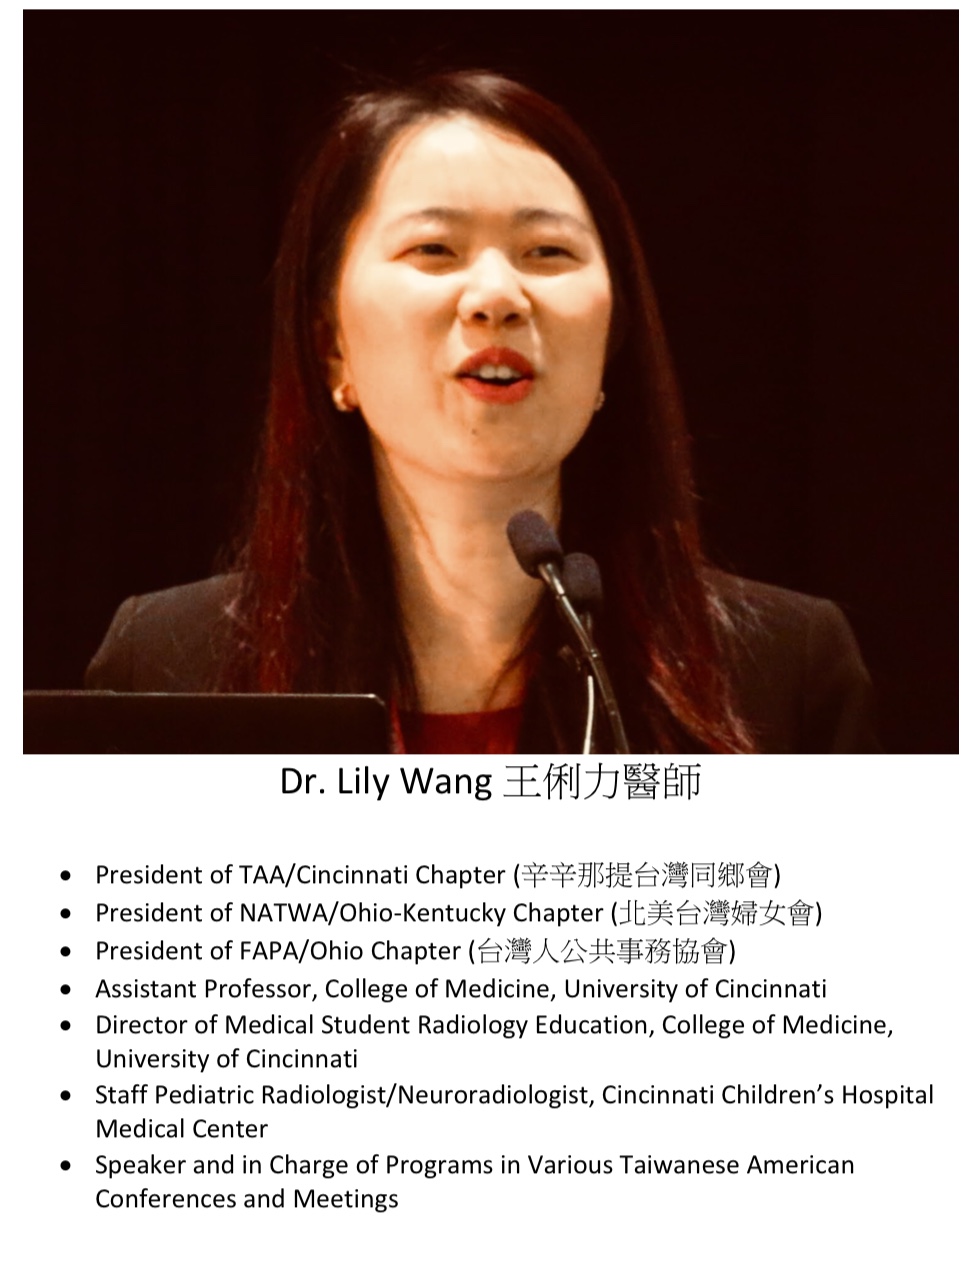 286. Dr. Lily Wang 王俐力醫師